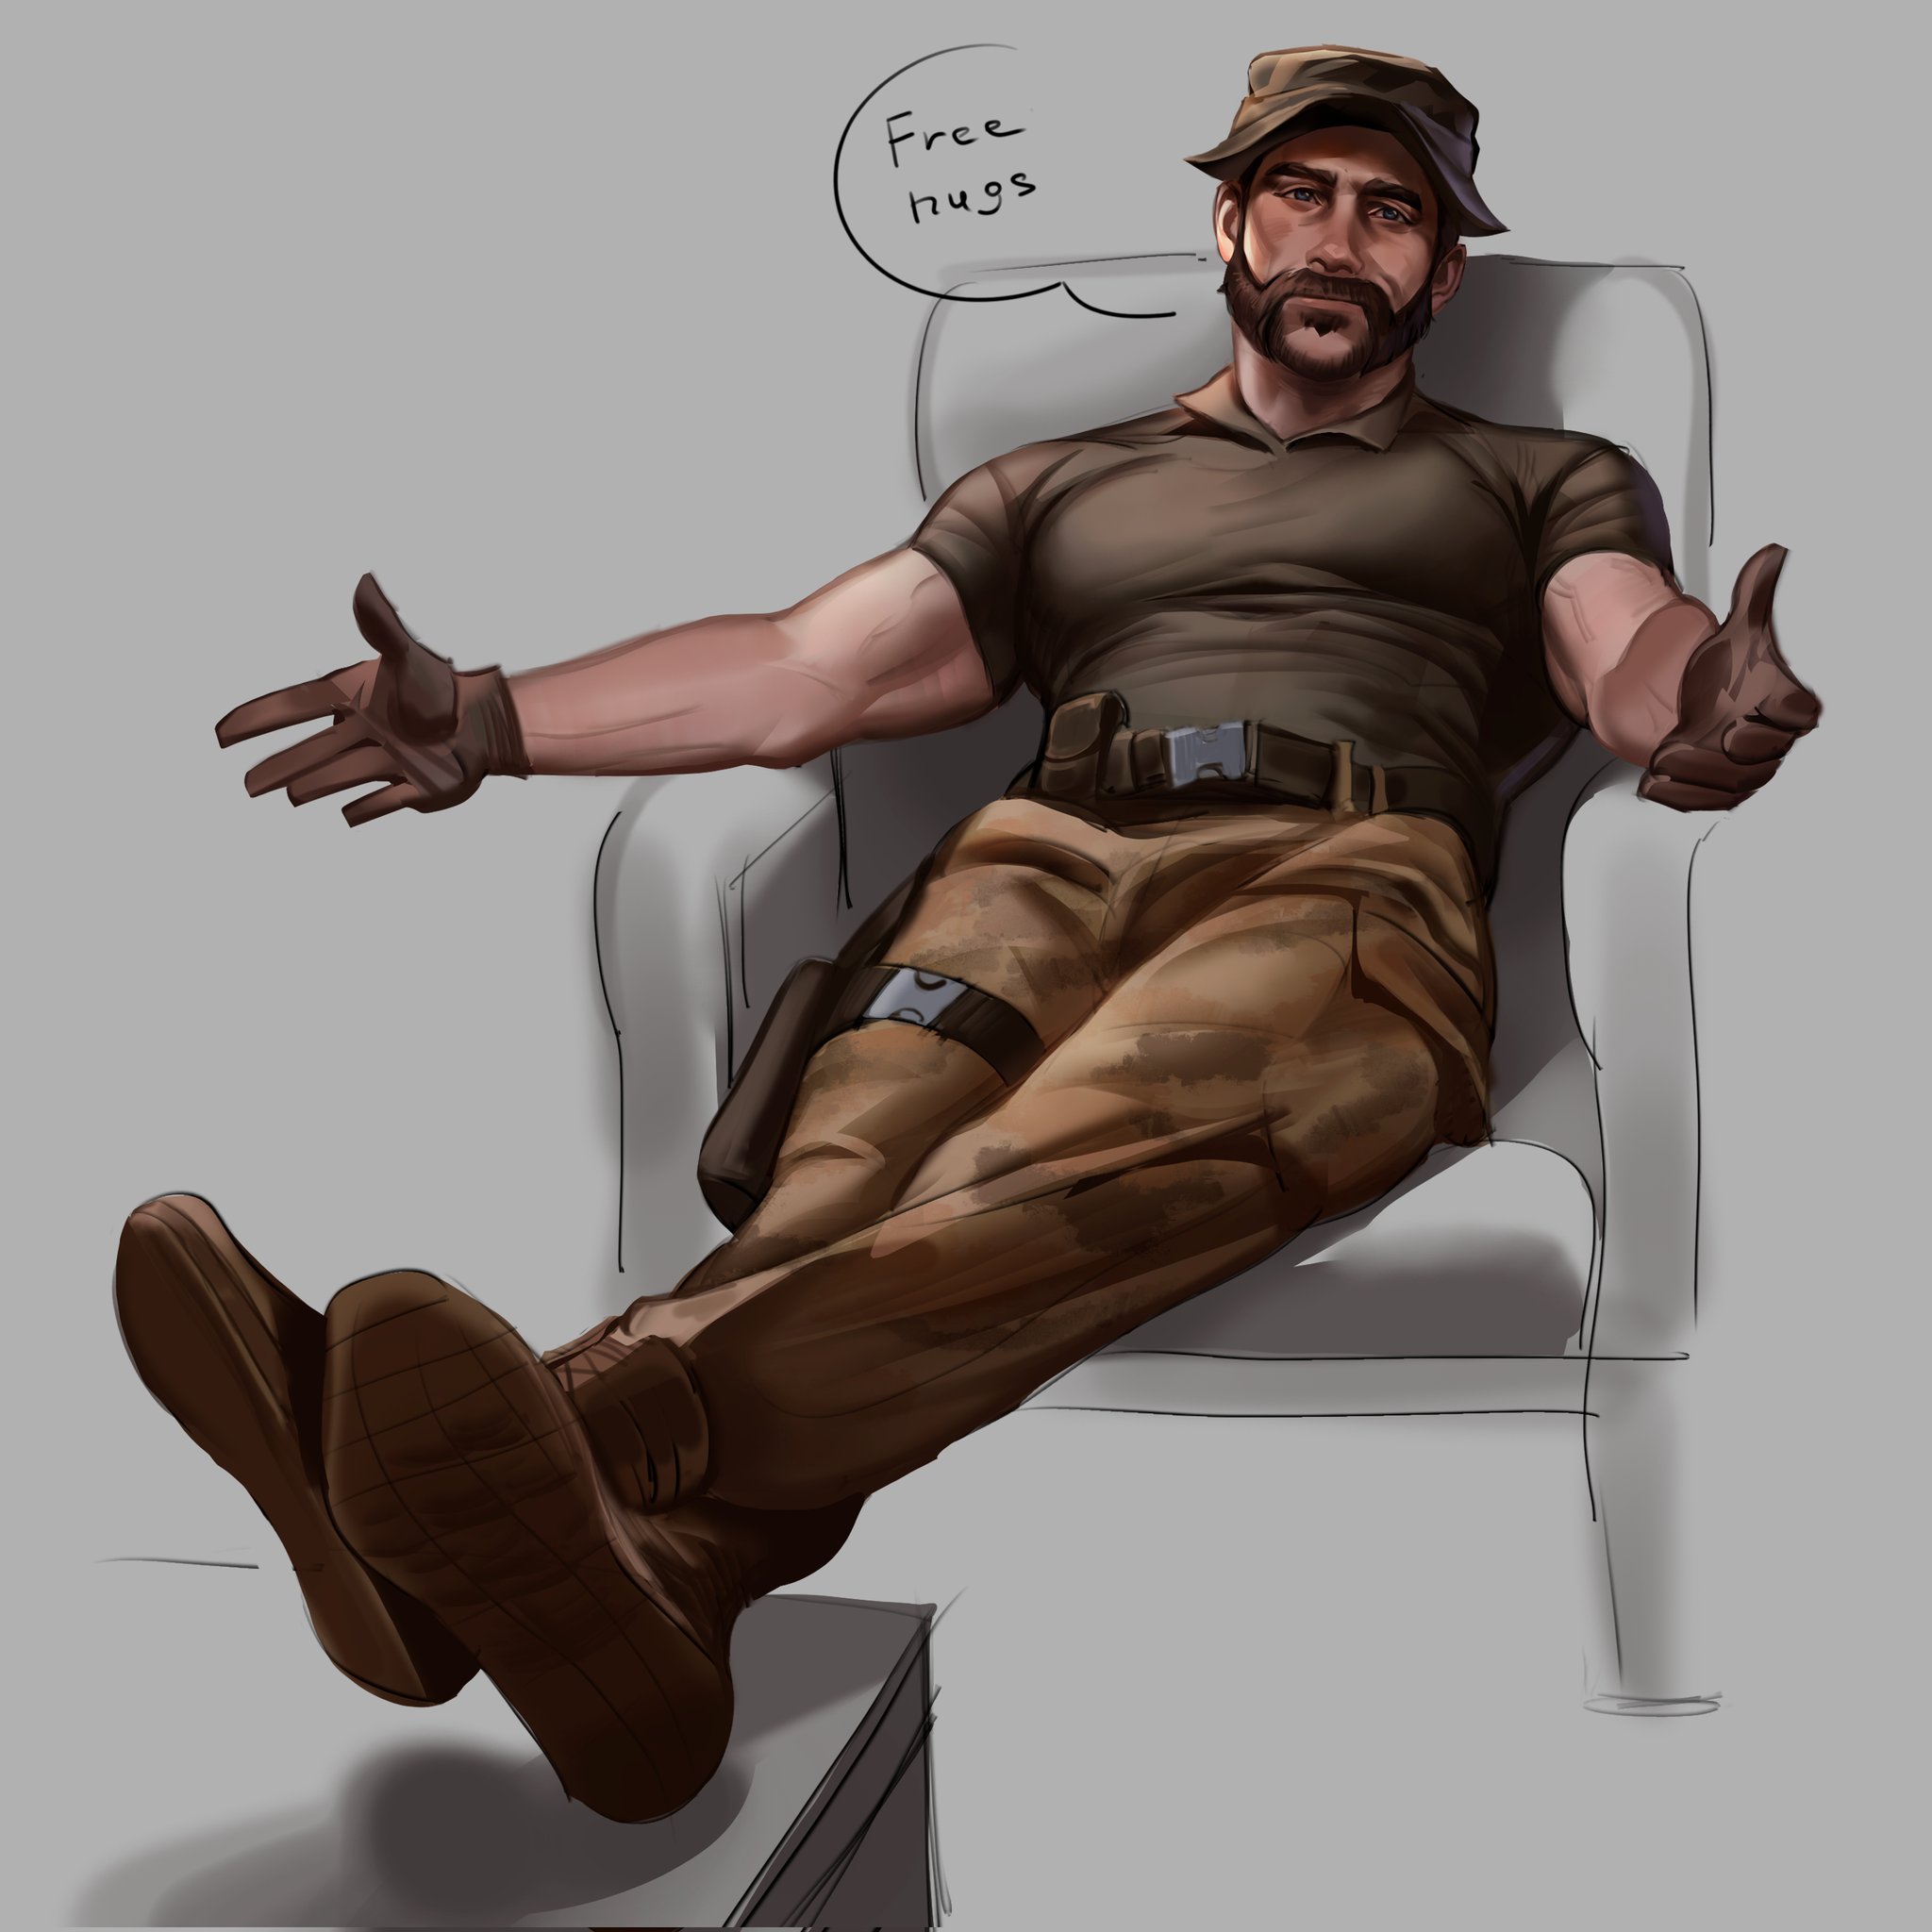 captain price (call of duty and 1 more) drawn by sasha_shkret | Danbooru